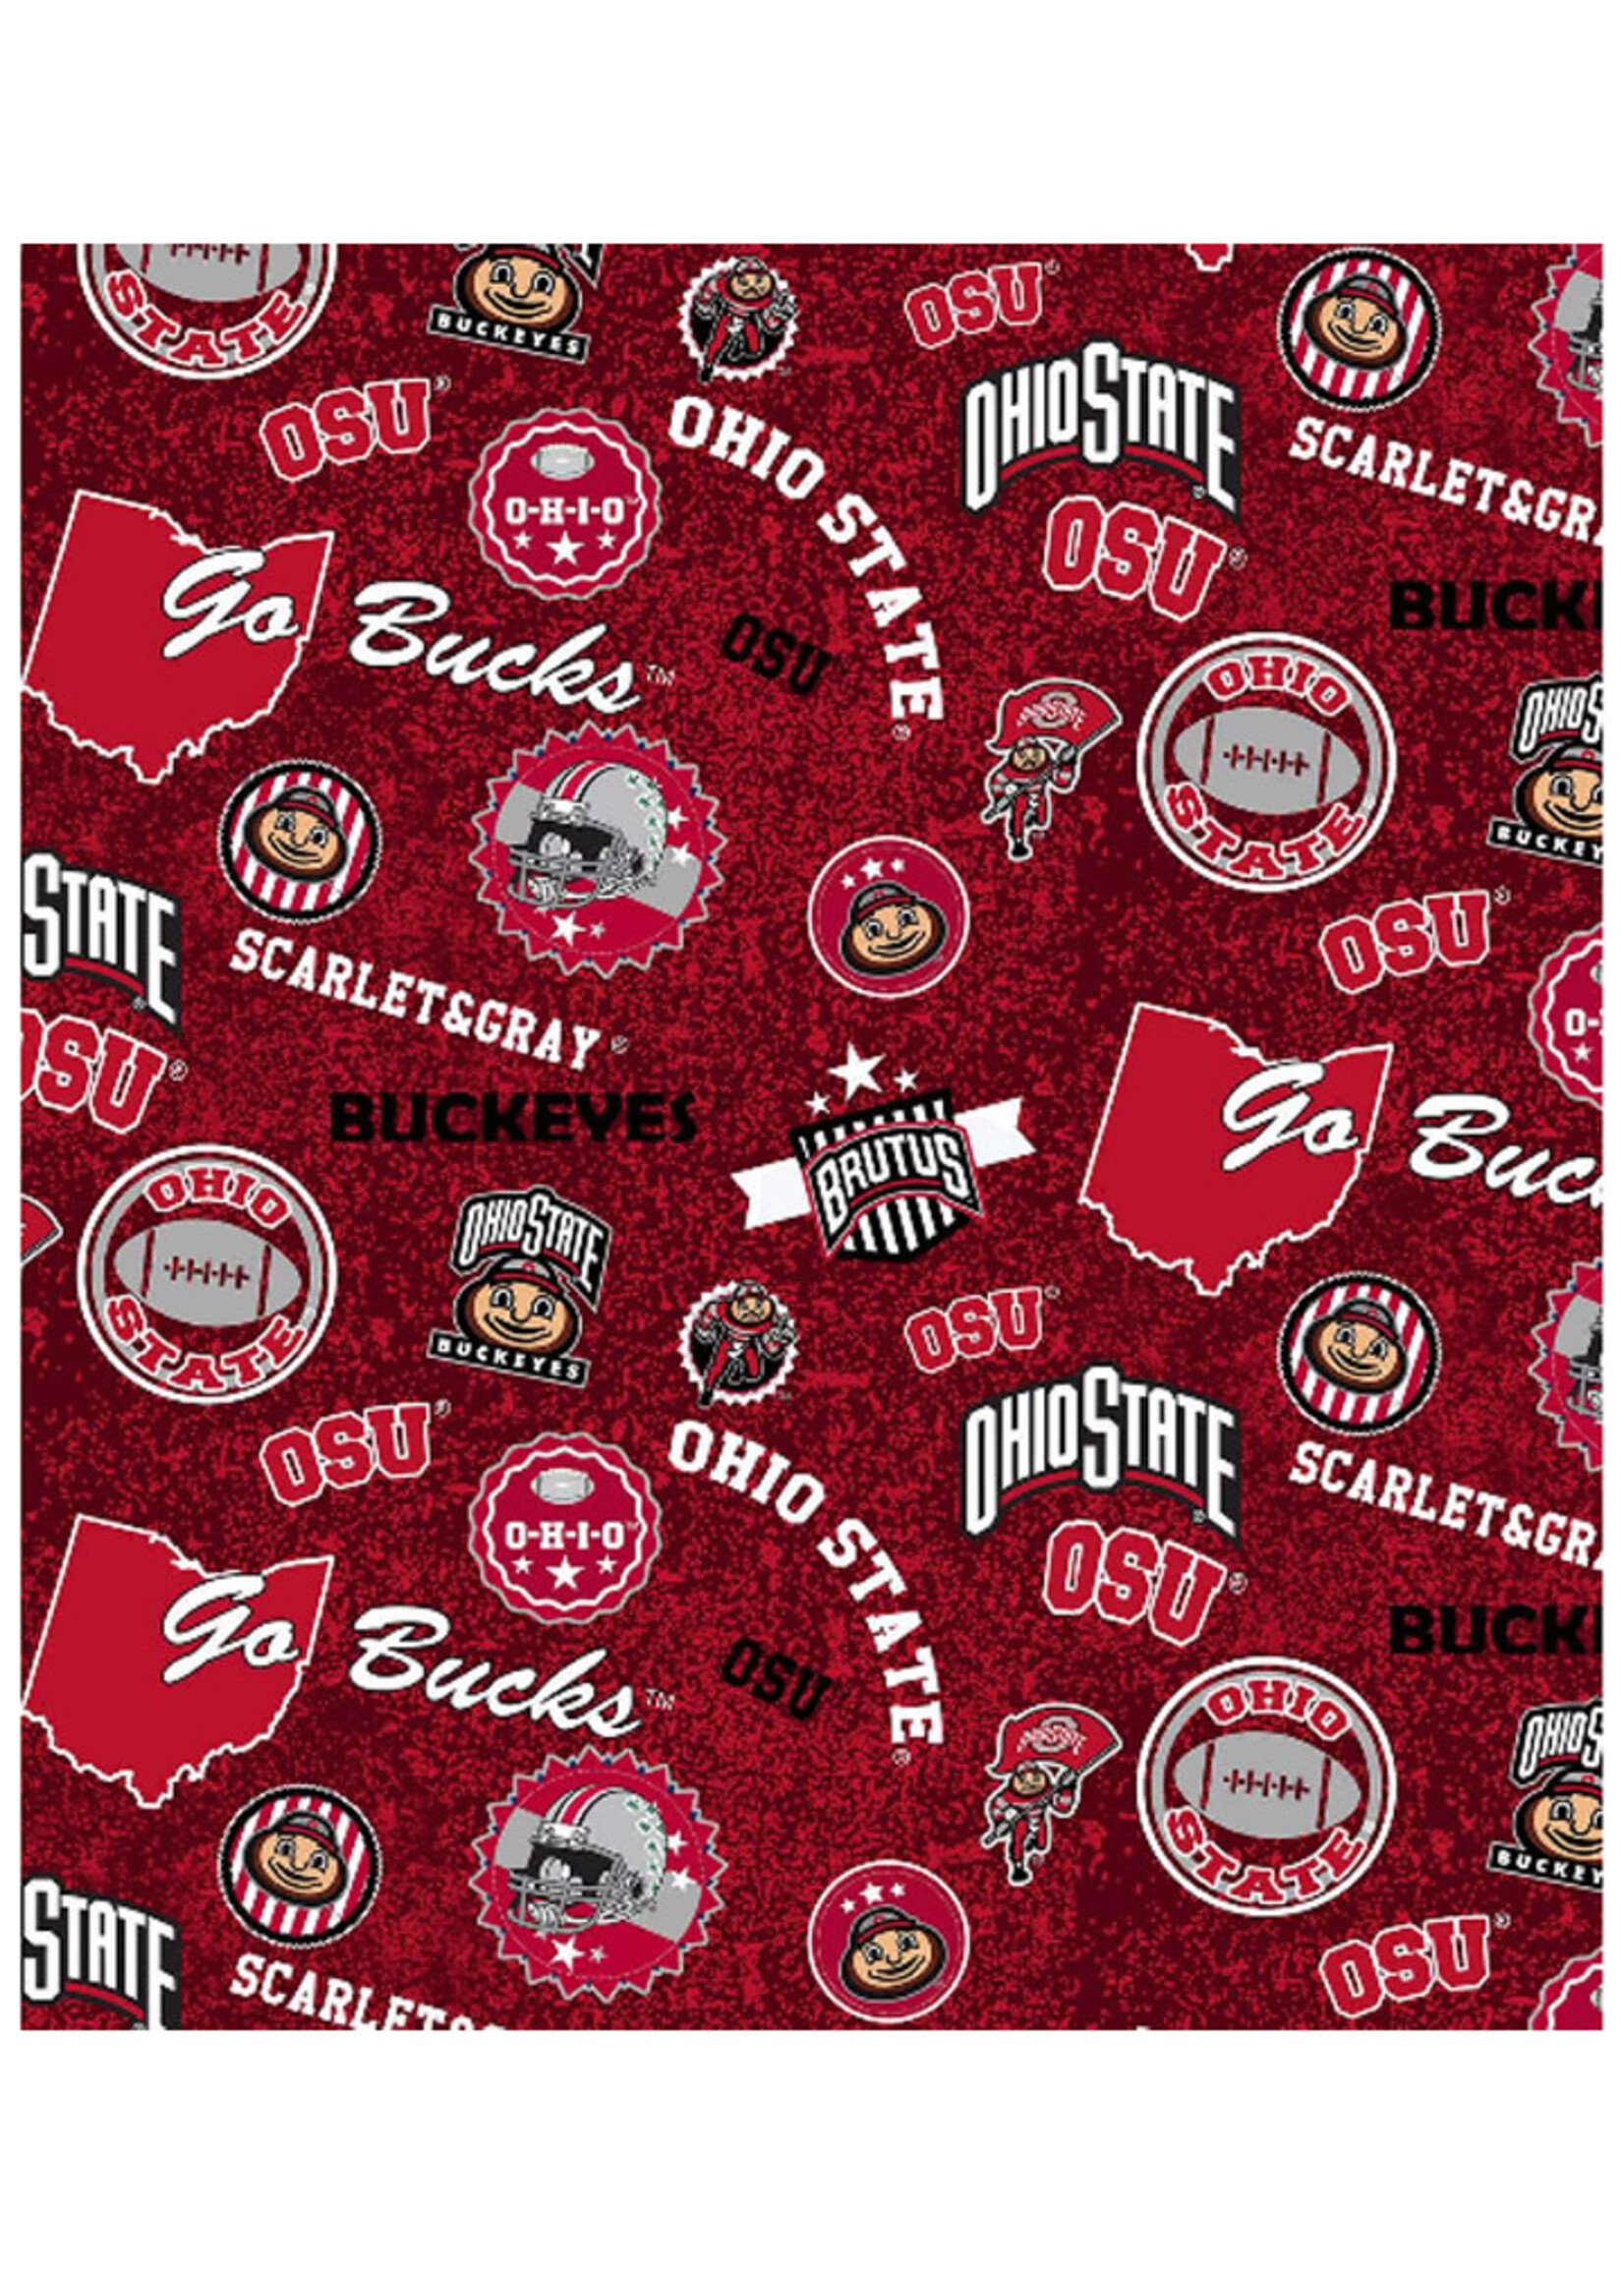 Ohio State Buckeyes Home State Cotton Material 15ydsx42in